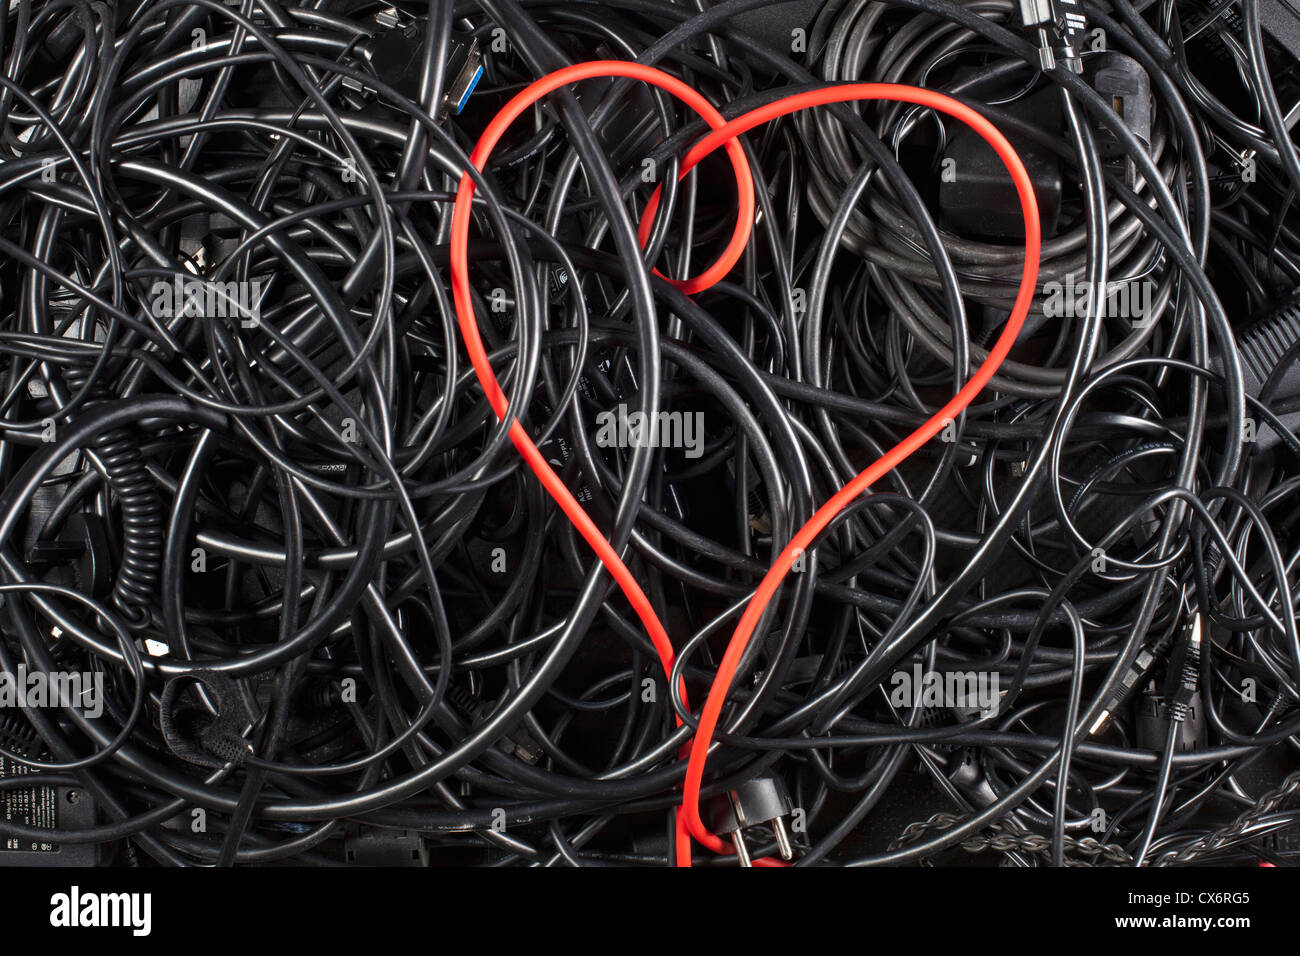 A red cord in a heart shape amongst tangled black cables and cords Stock Photo